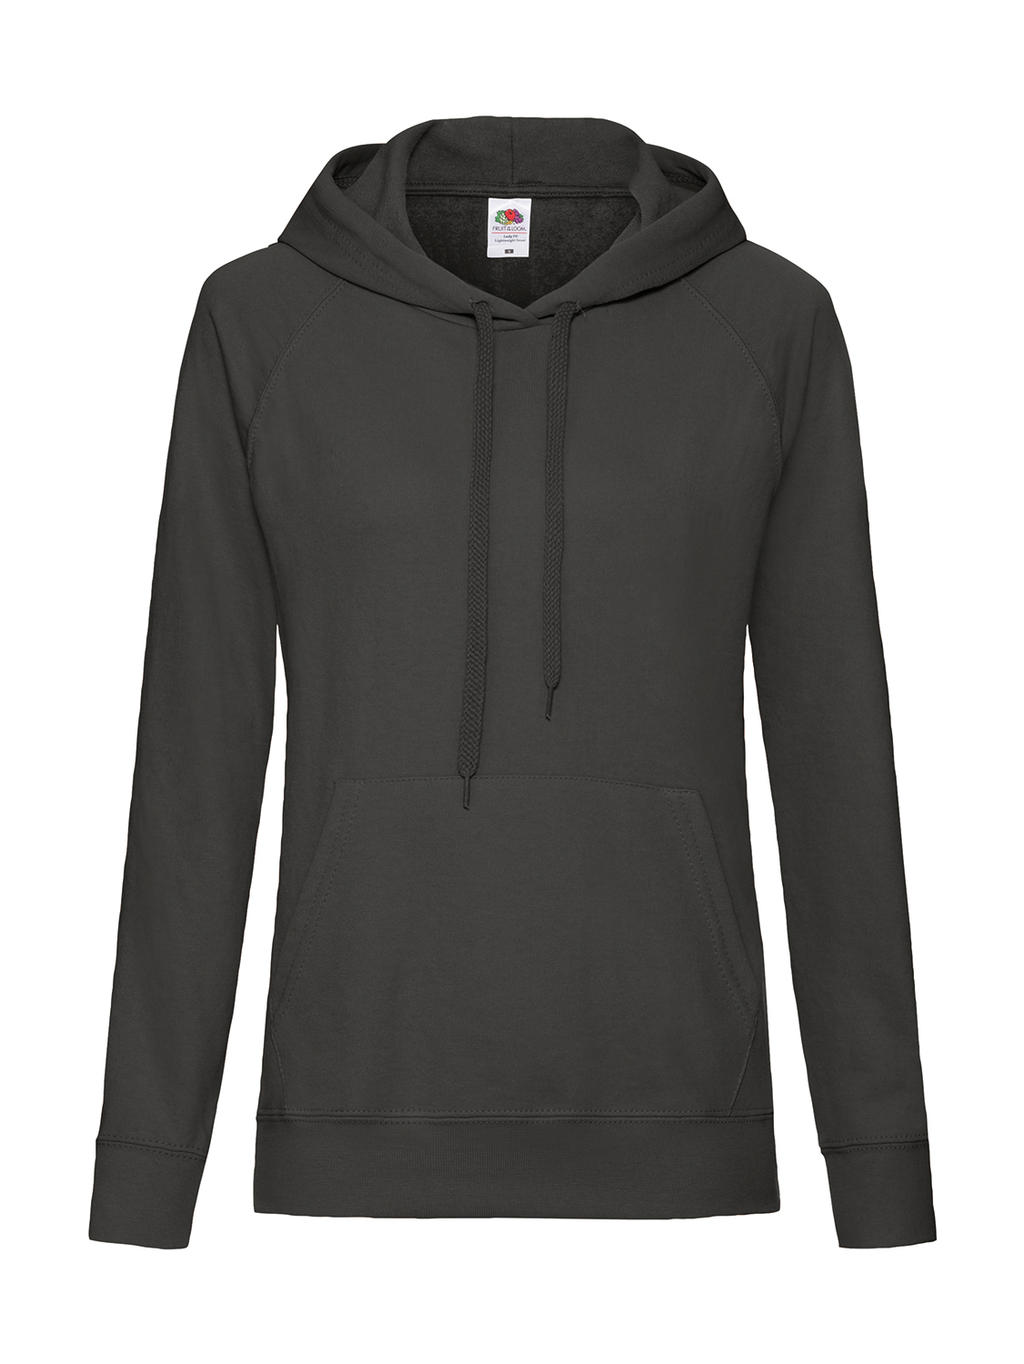  Ladies Lightweight Hooded Sweat in Farbe Light Graphite